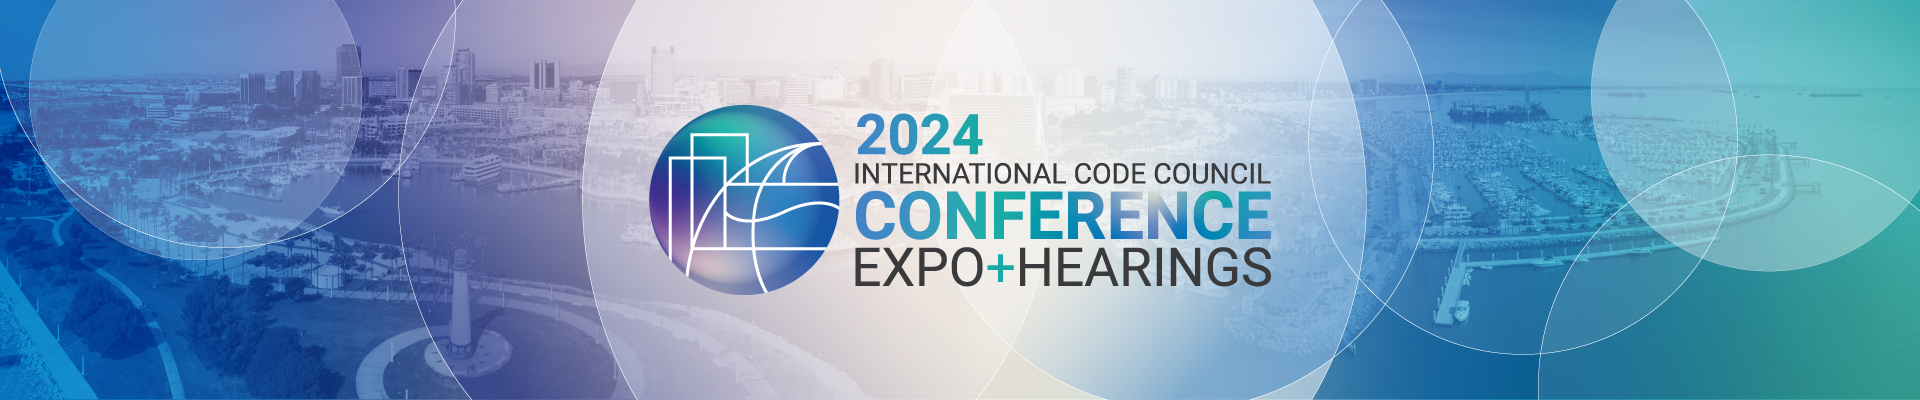 2024 Conference, Expo and Hearings – Welcome